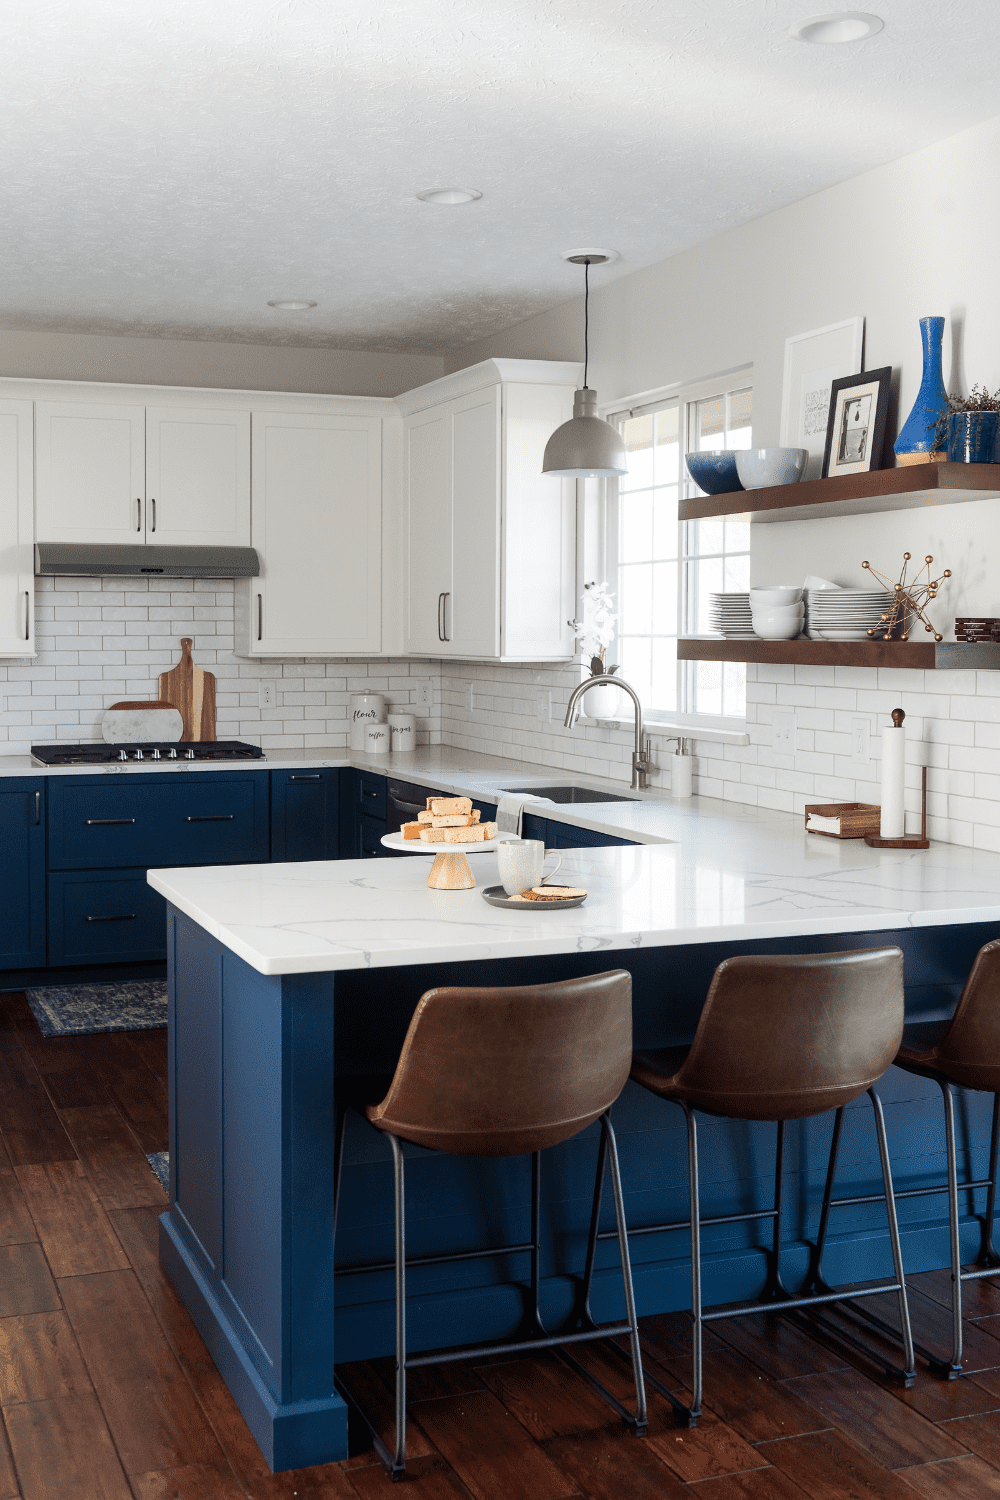 Nicholas Design Build | A blue and white kitchen with wooden floors.